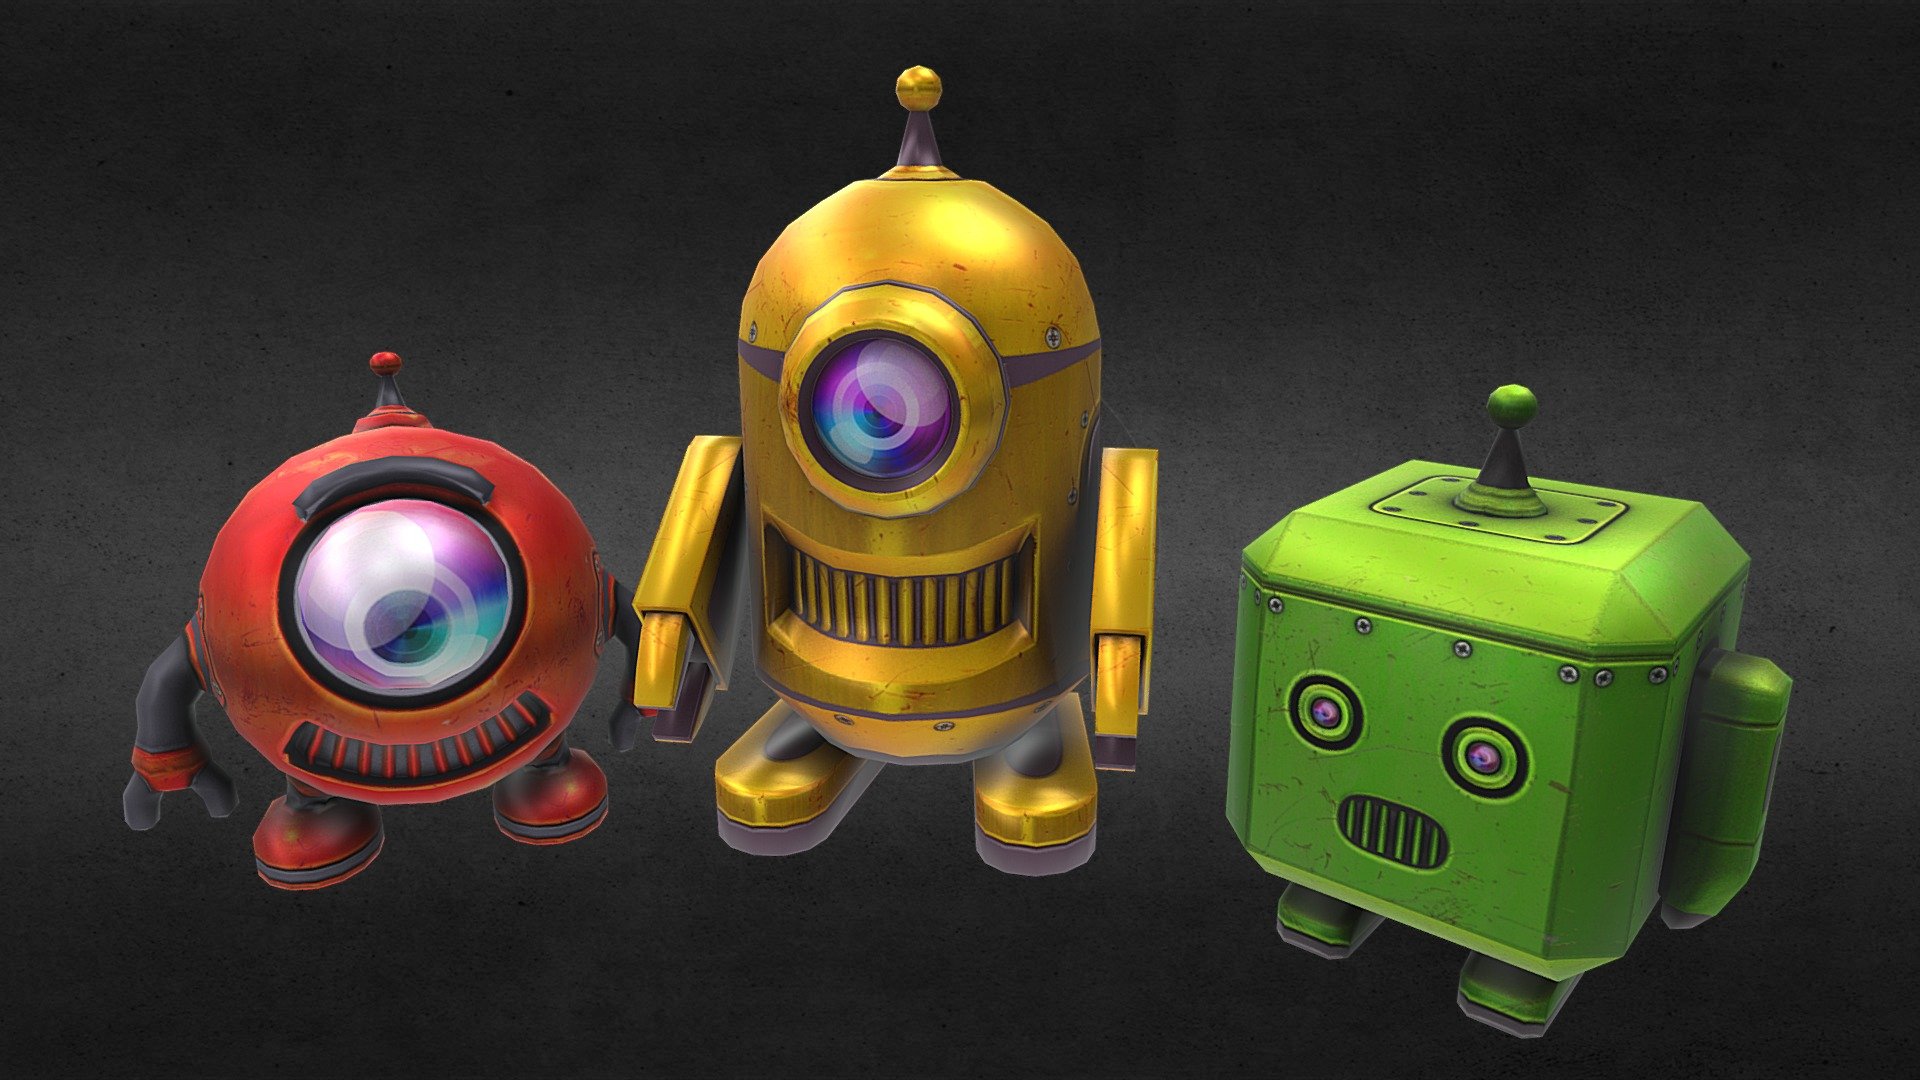 Lowpoly cartoon robots for mobile games, texture with baked reflections 3d model